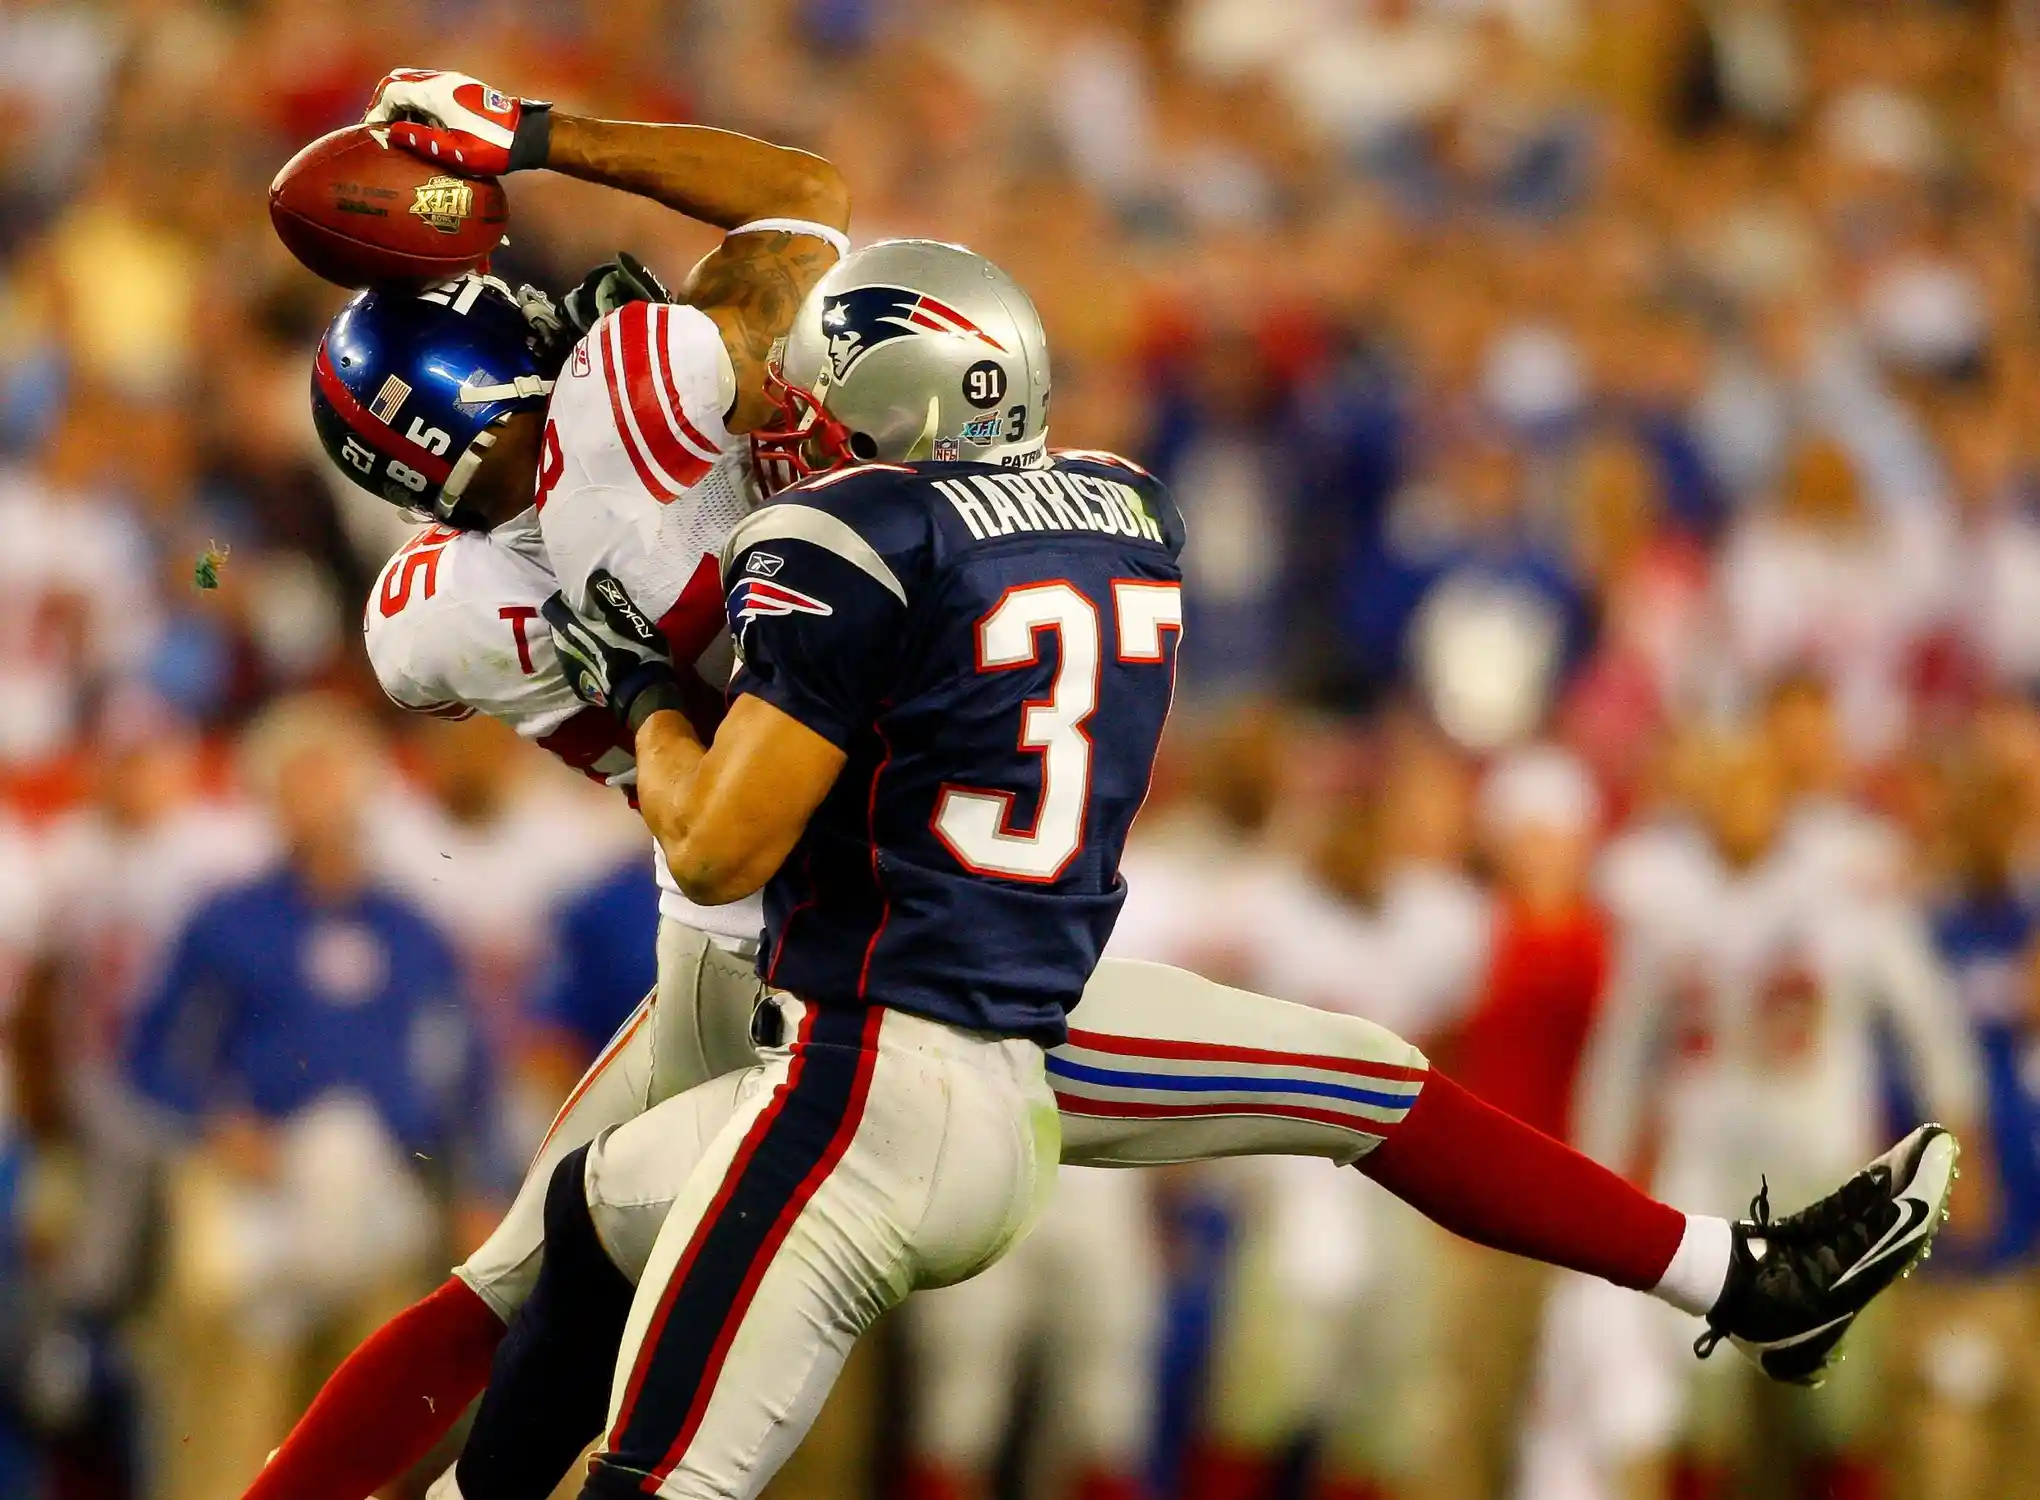 Giants receiver David Tyree catches a pass while in the clutches of Patriots safety Rodney Harrison en route to New York's 17-14 victory over New England in Super Bowl XLII.